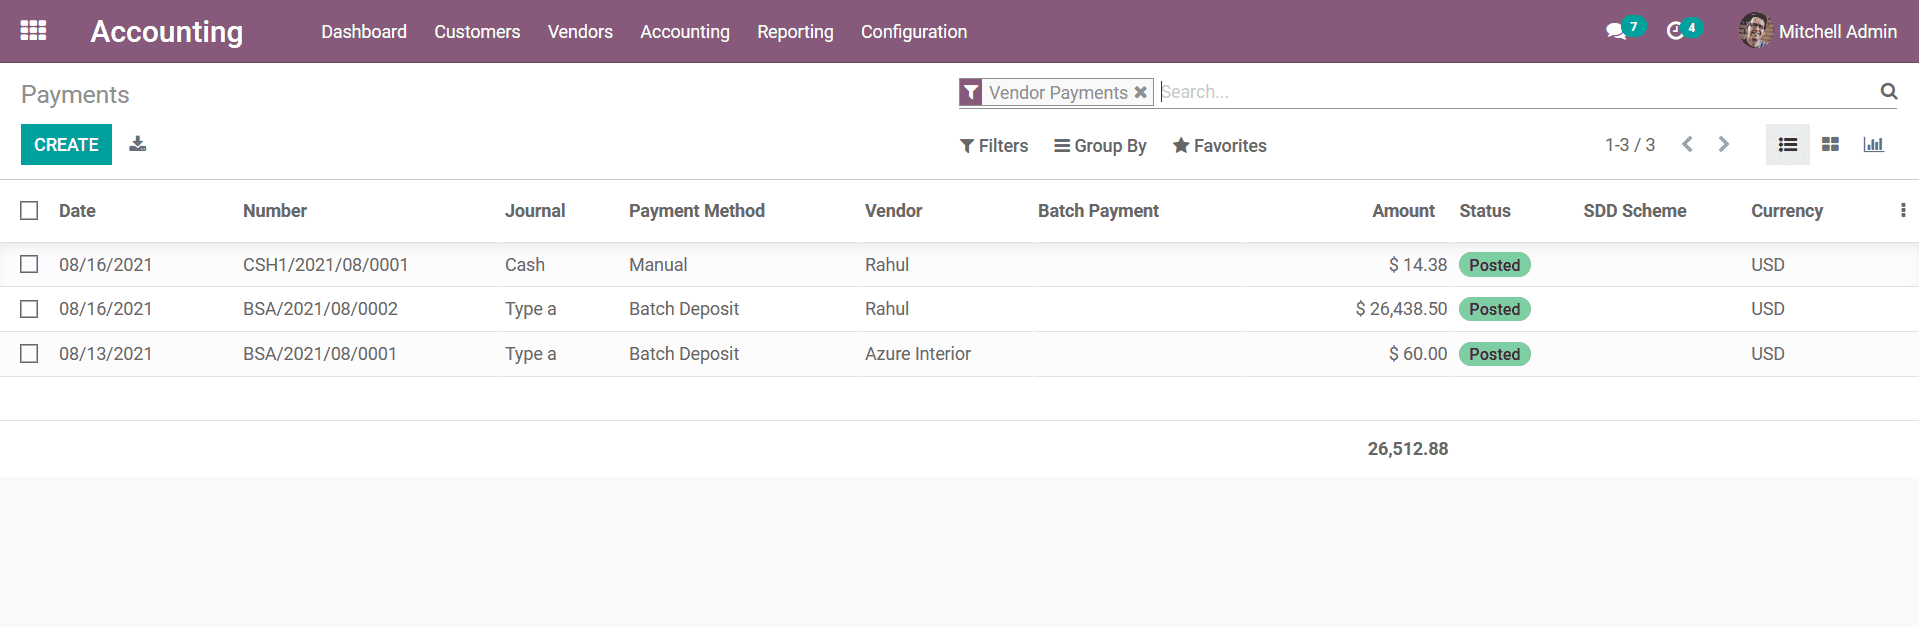 Manage the Vendor Bill Payments